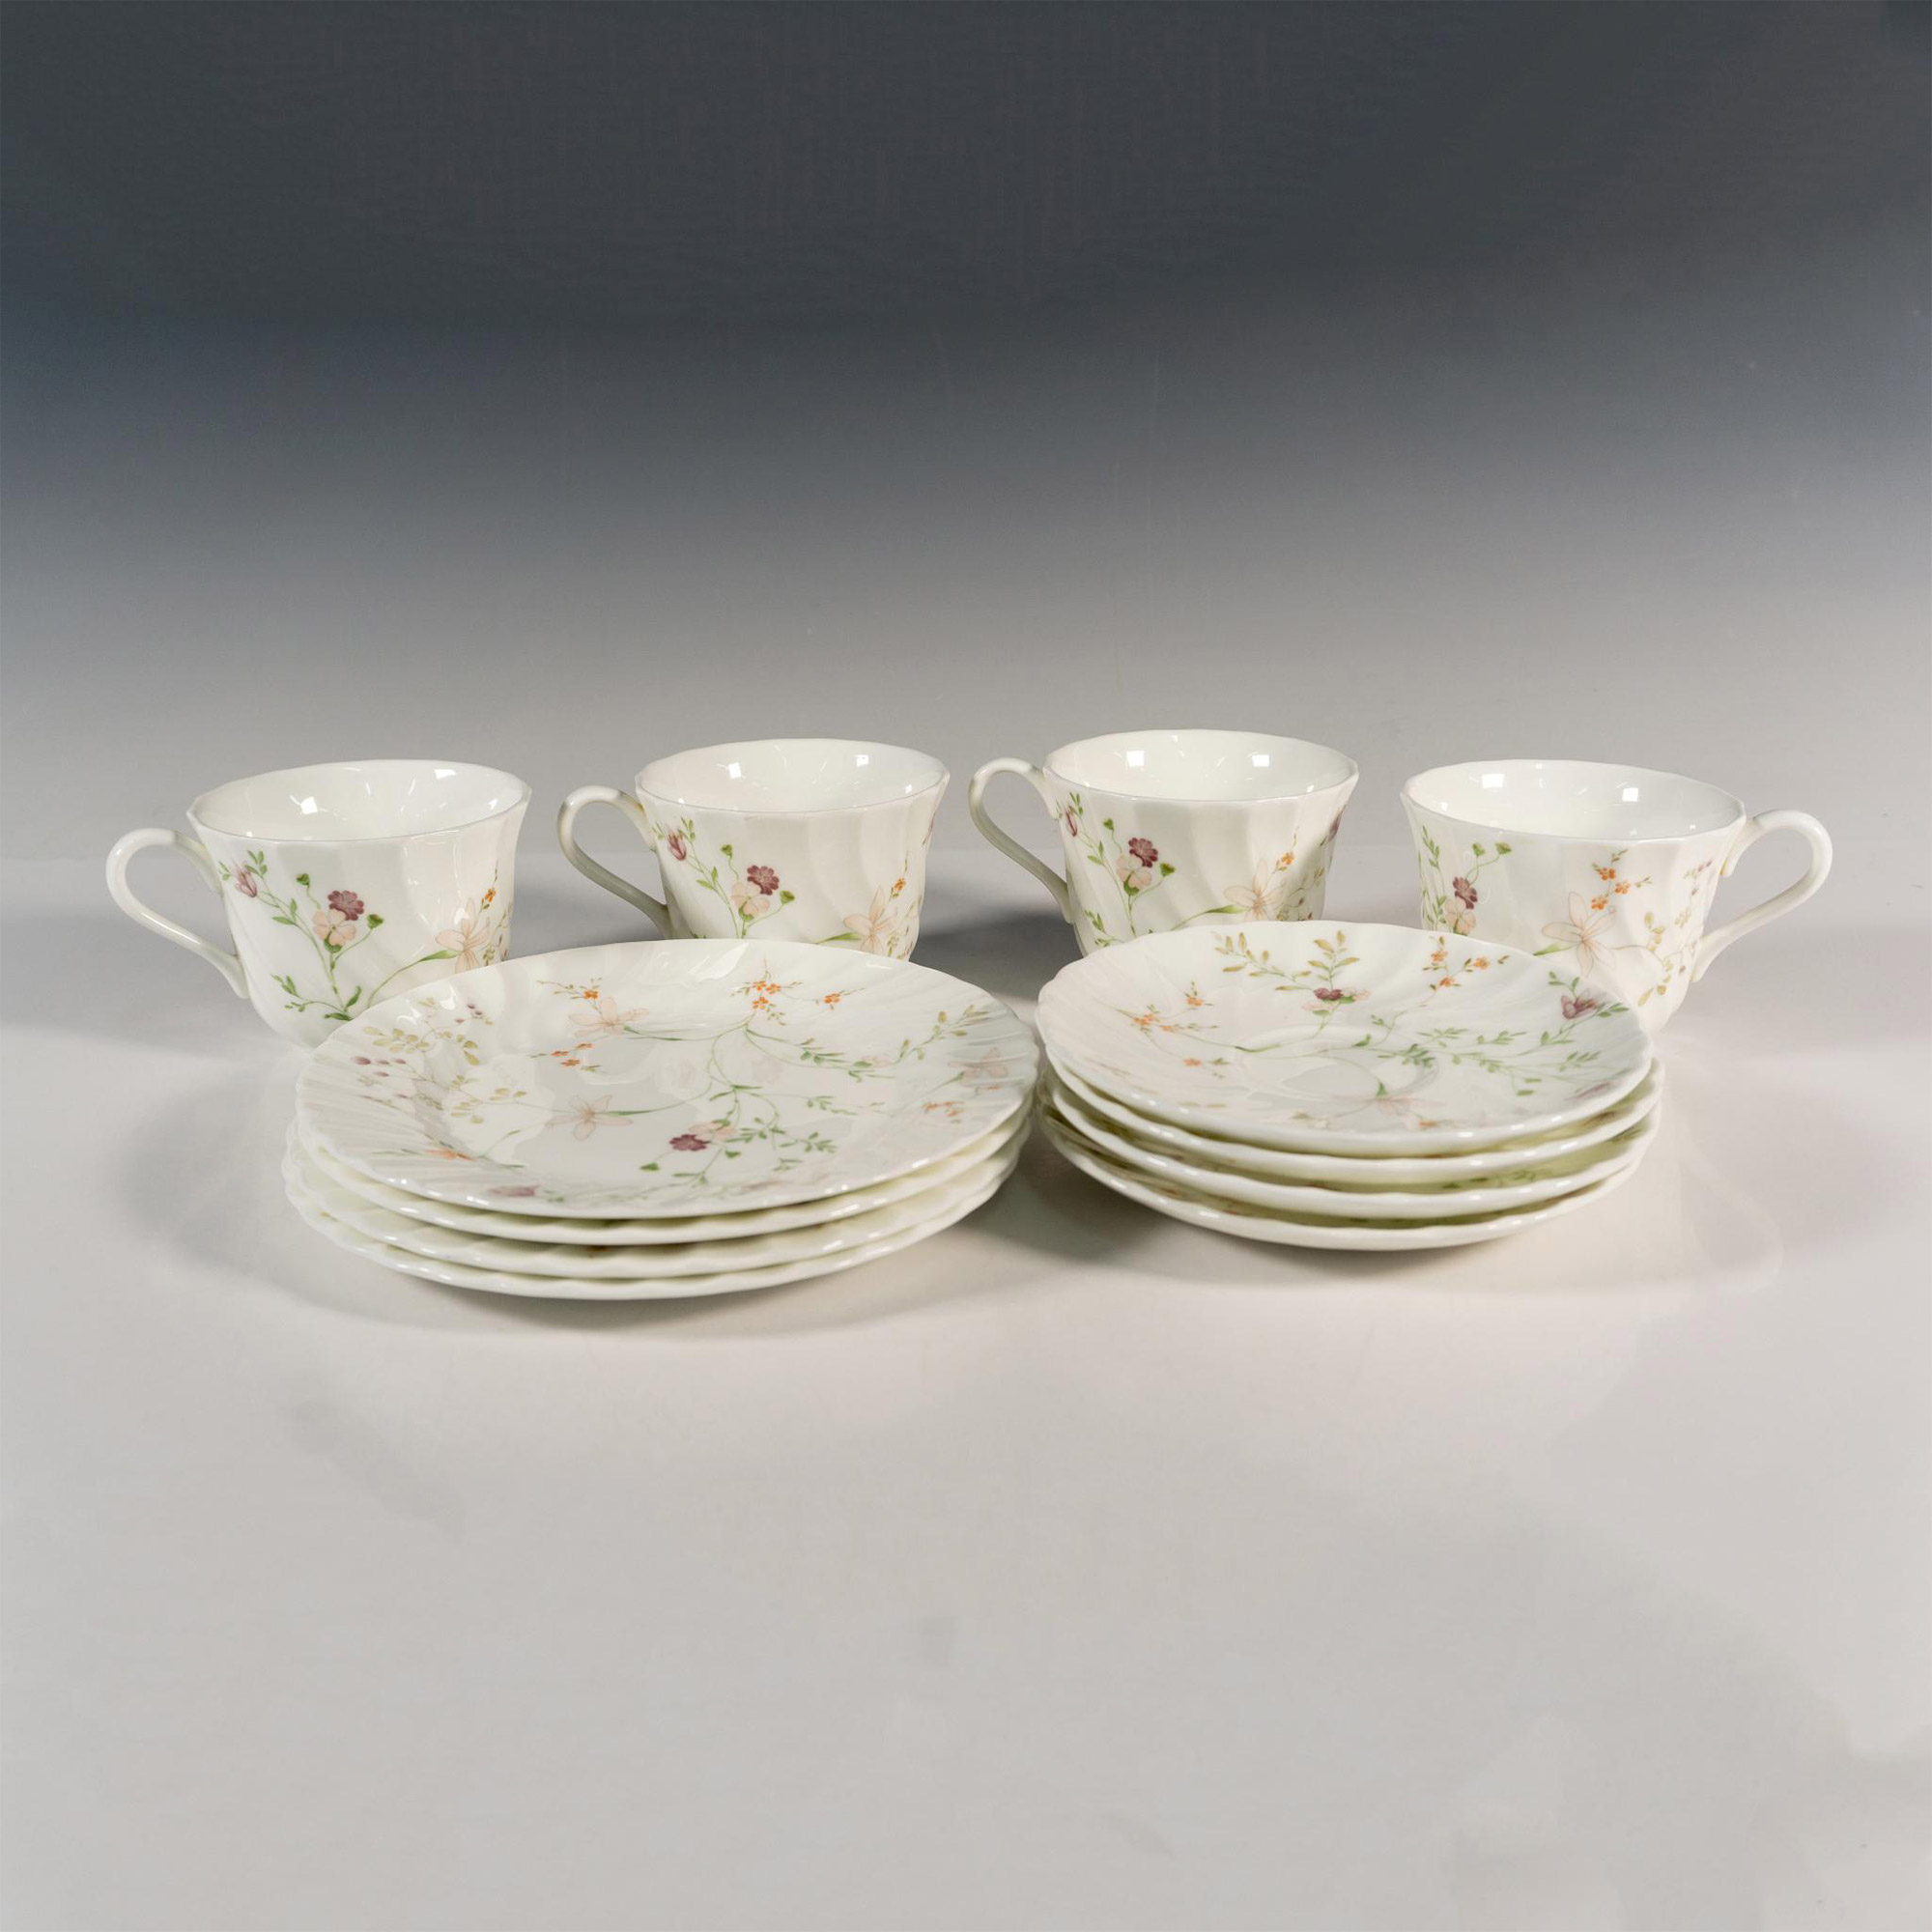 12pc Wedgwood Bone China Cups, Saucers + Plates, Campion - Image 5 of 5